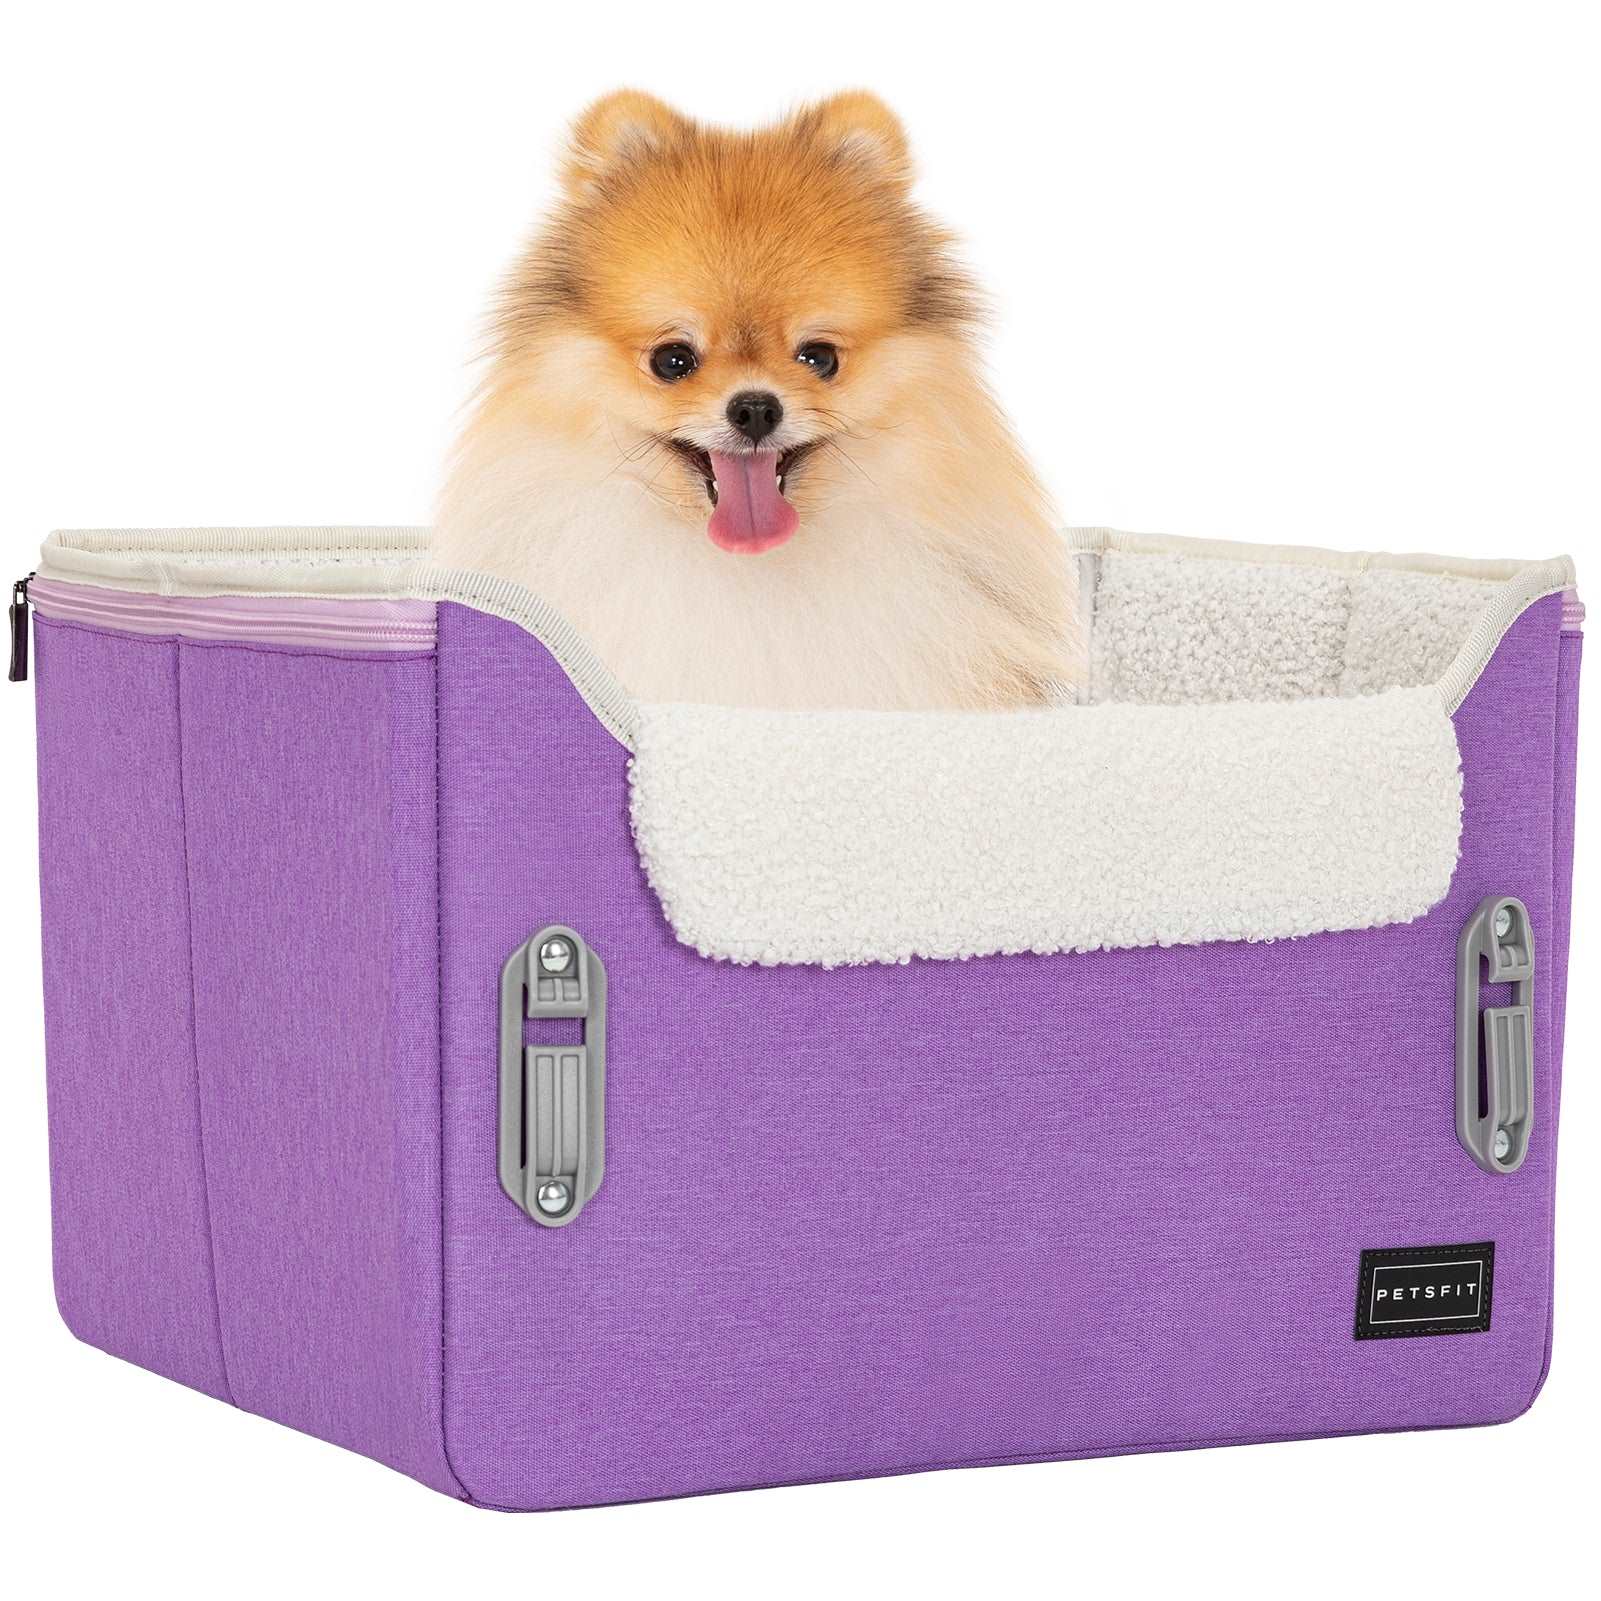 PETSFIT-Dog-Car-Seats-for-Small-Dogs-Puppy-Stable-Pet-Car-Seat-14